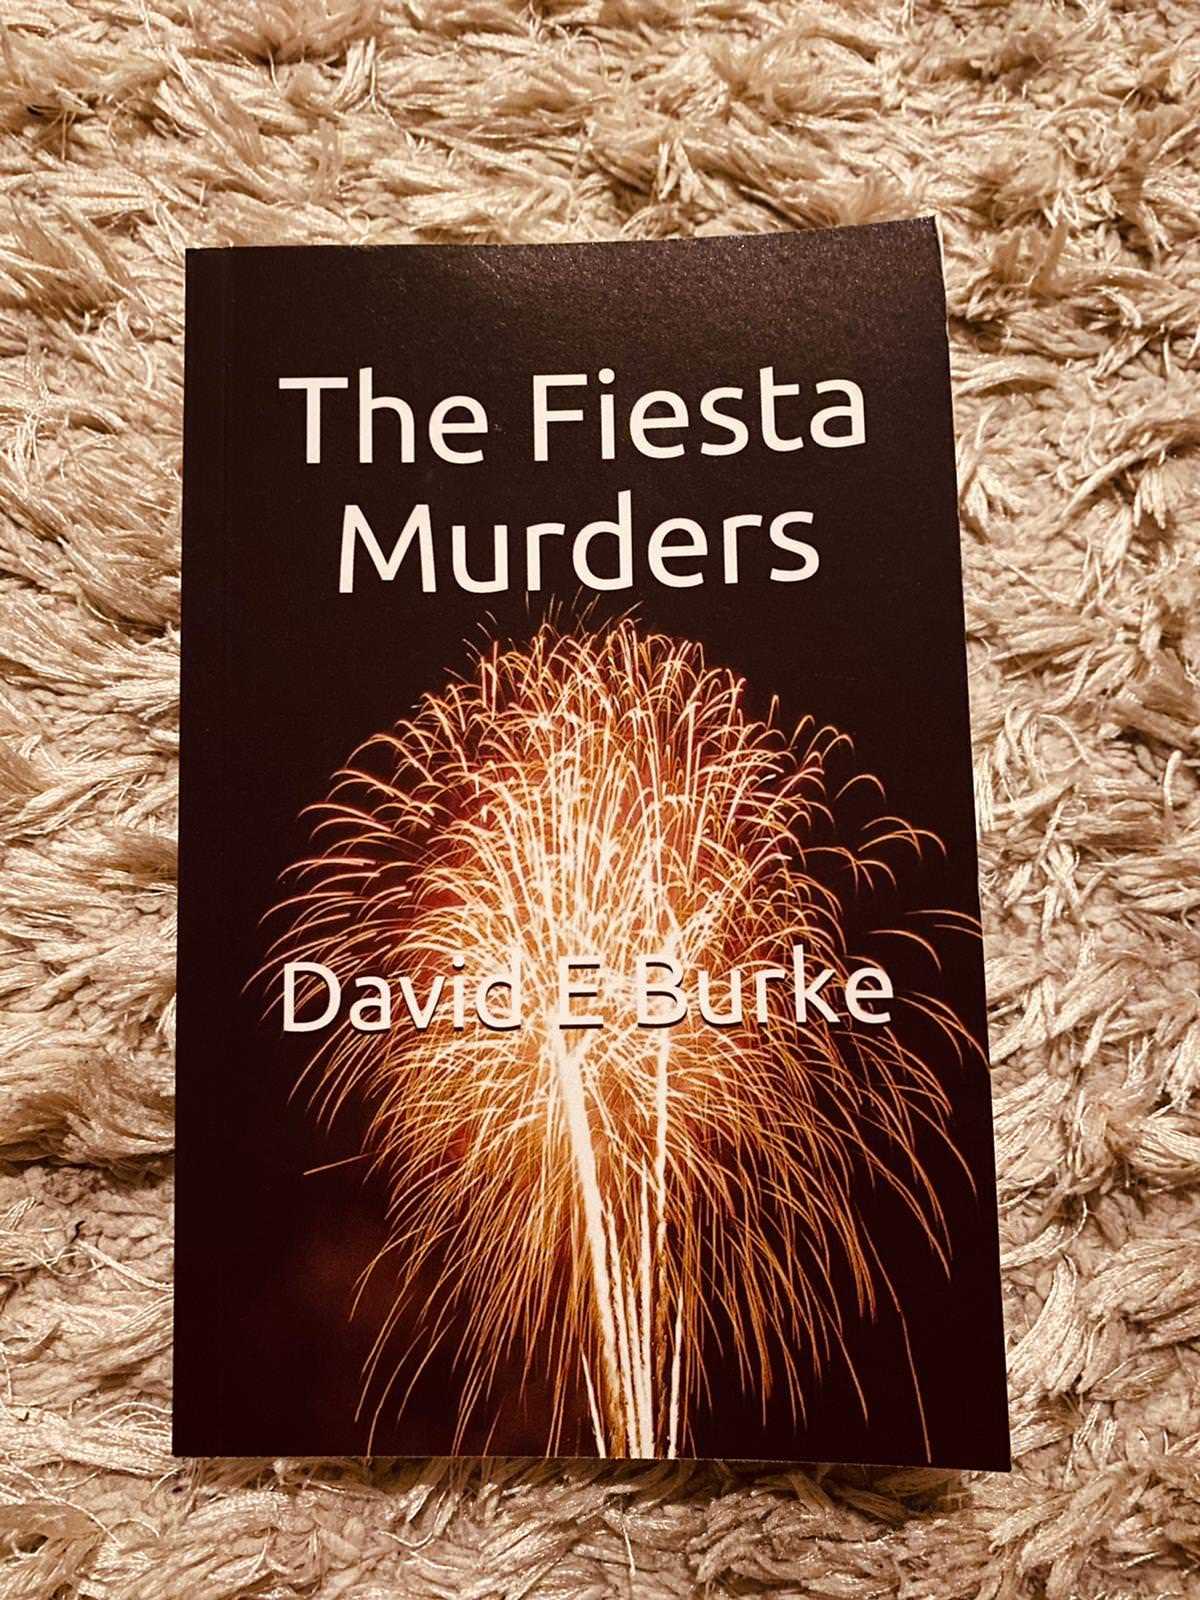 The Fiesta Murder is a book about an expat English detective learning to adjust to life on the Spanish island of Menorca. David, the author, tells us more about it.